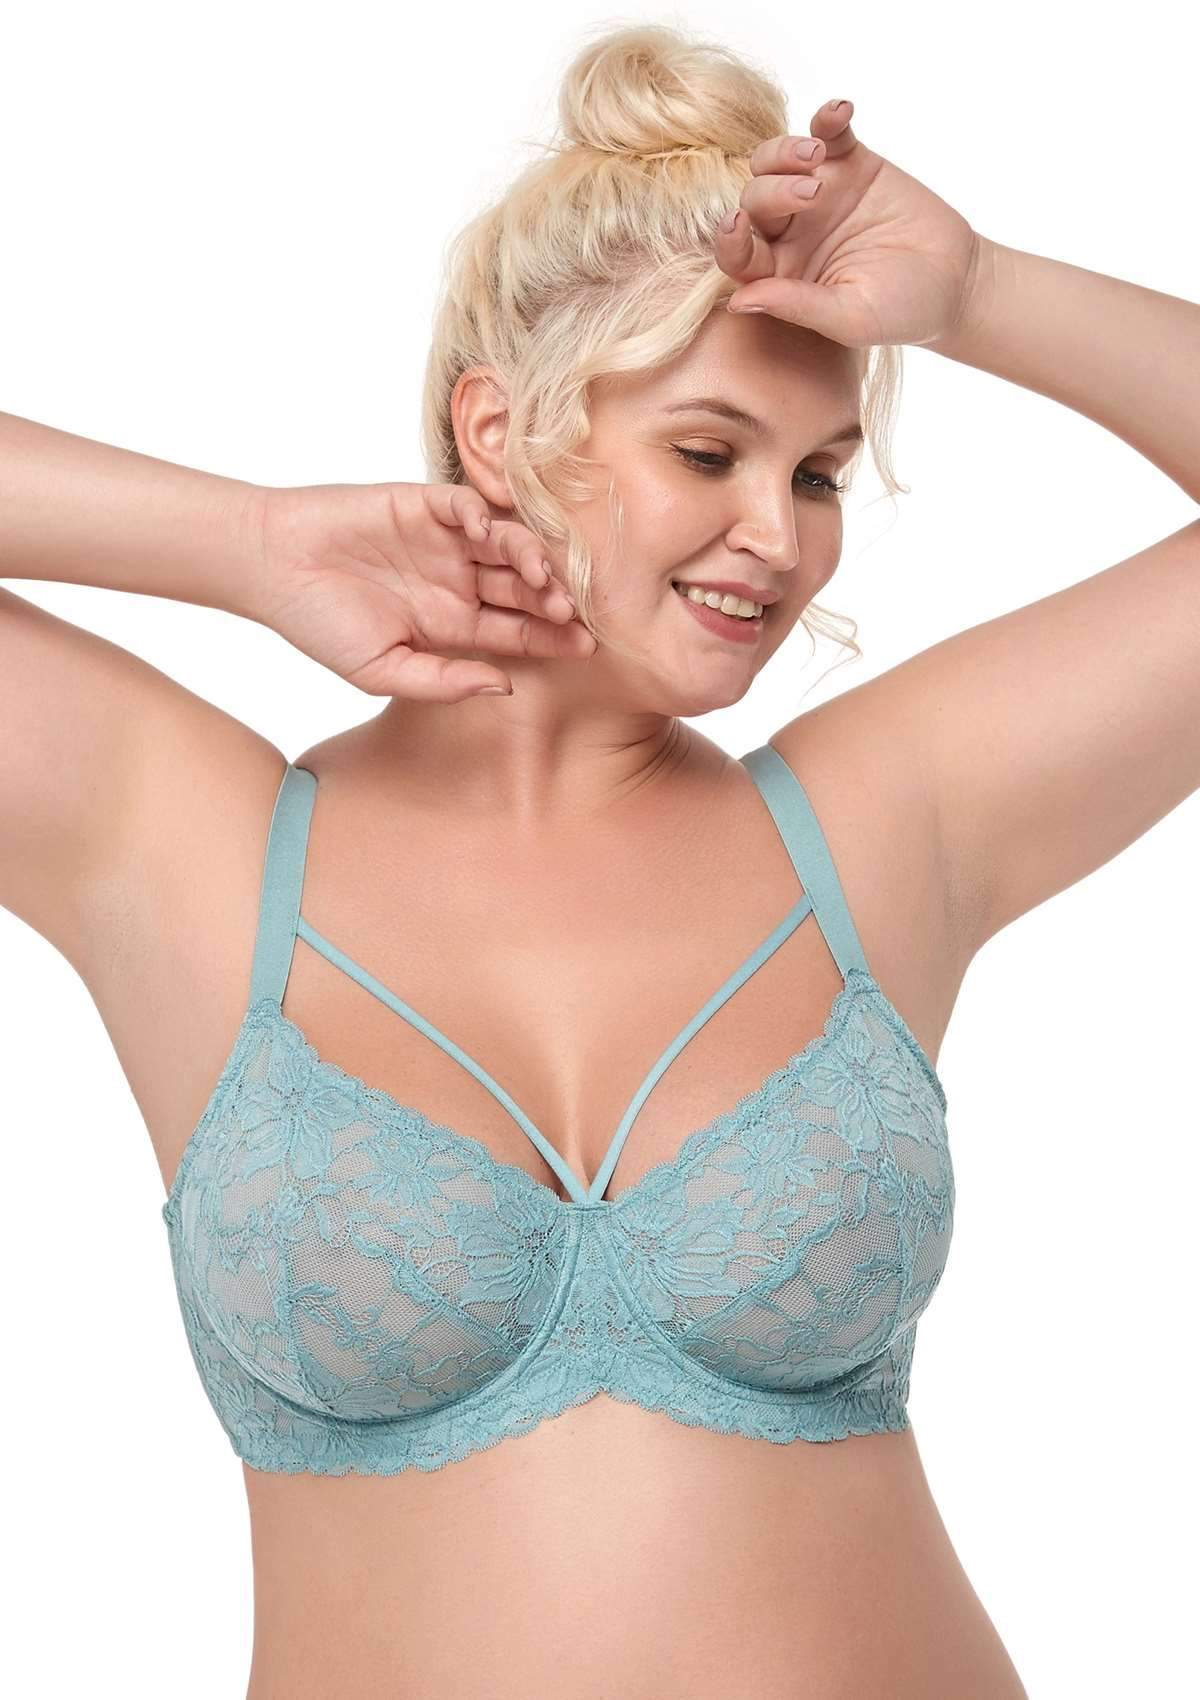 HSIA Pretty In Petals Unlined Lace Bra: Comfortable And Supportive Bra - Pewter Blue / 40 / DD/E